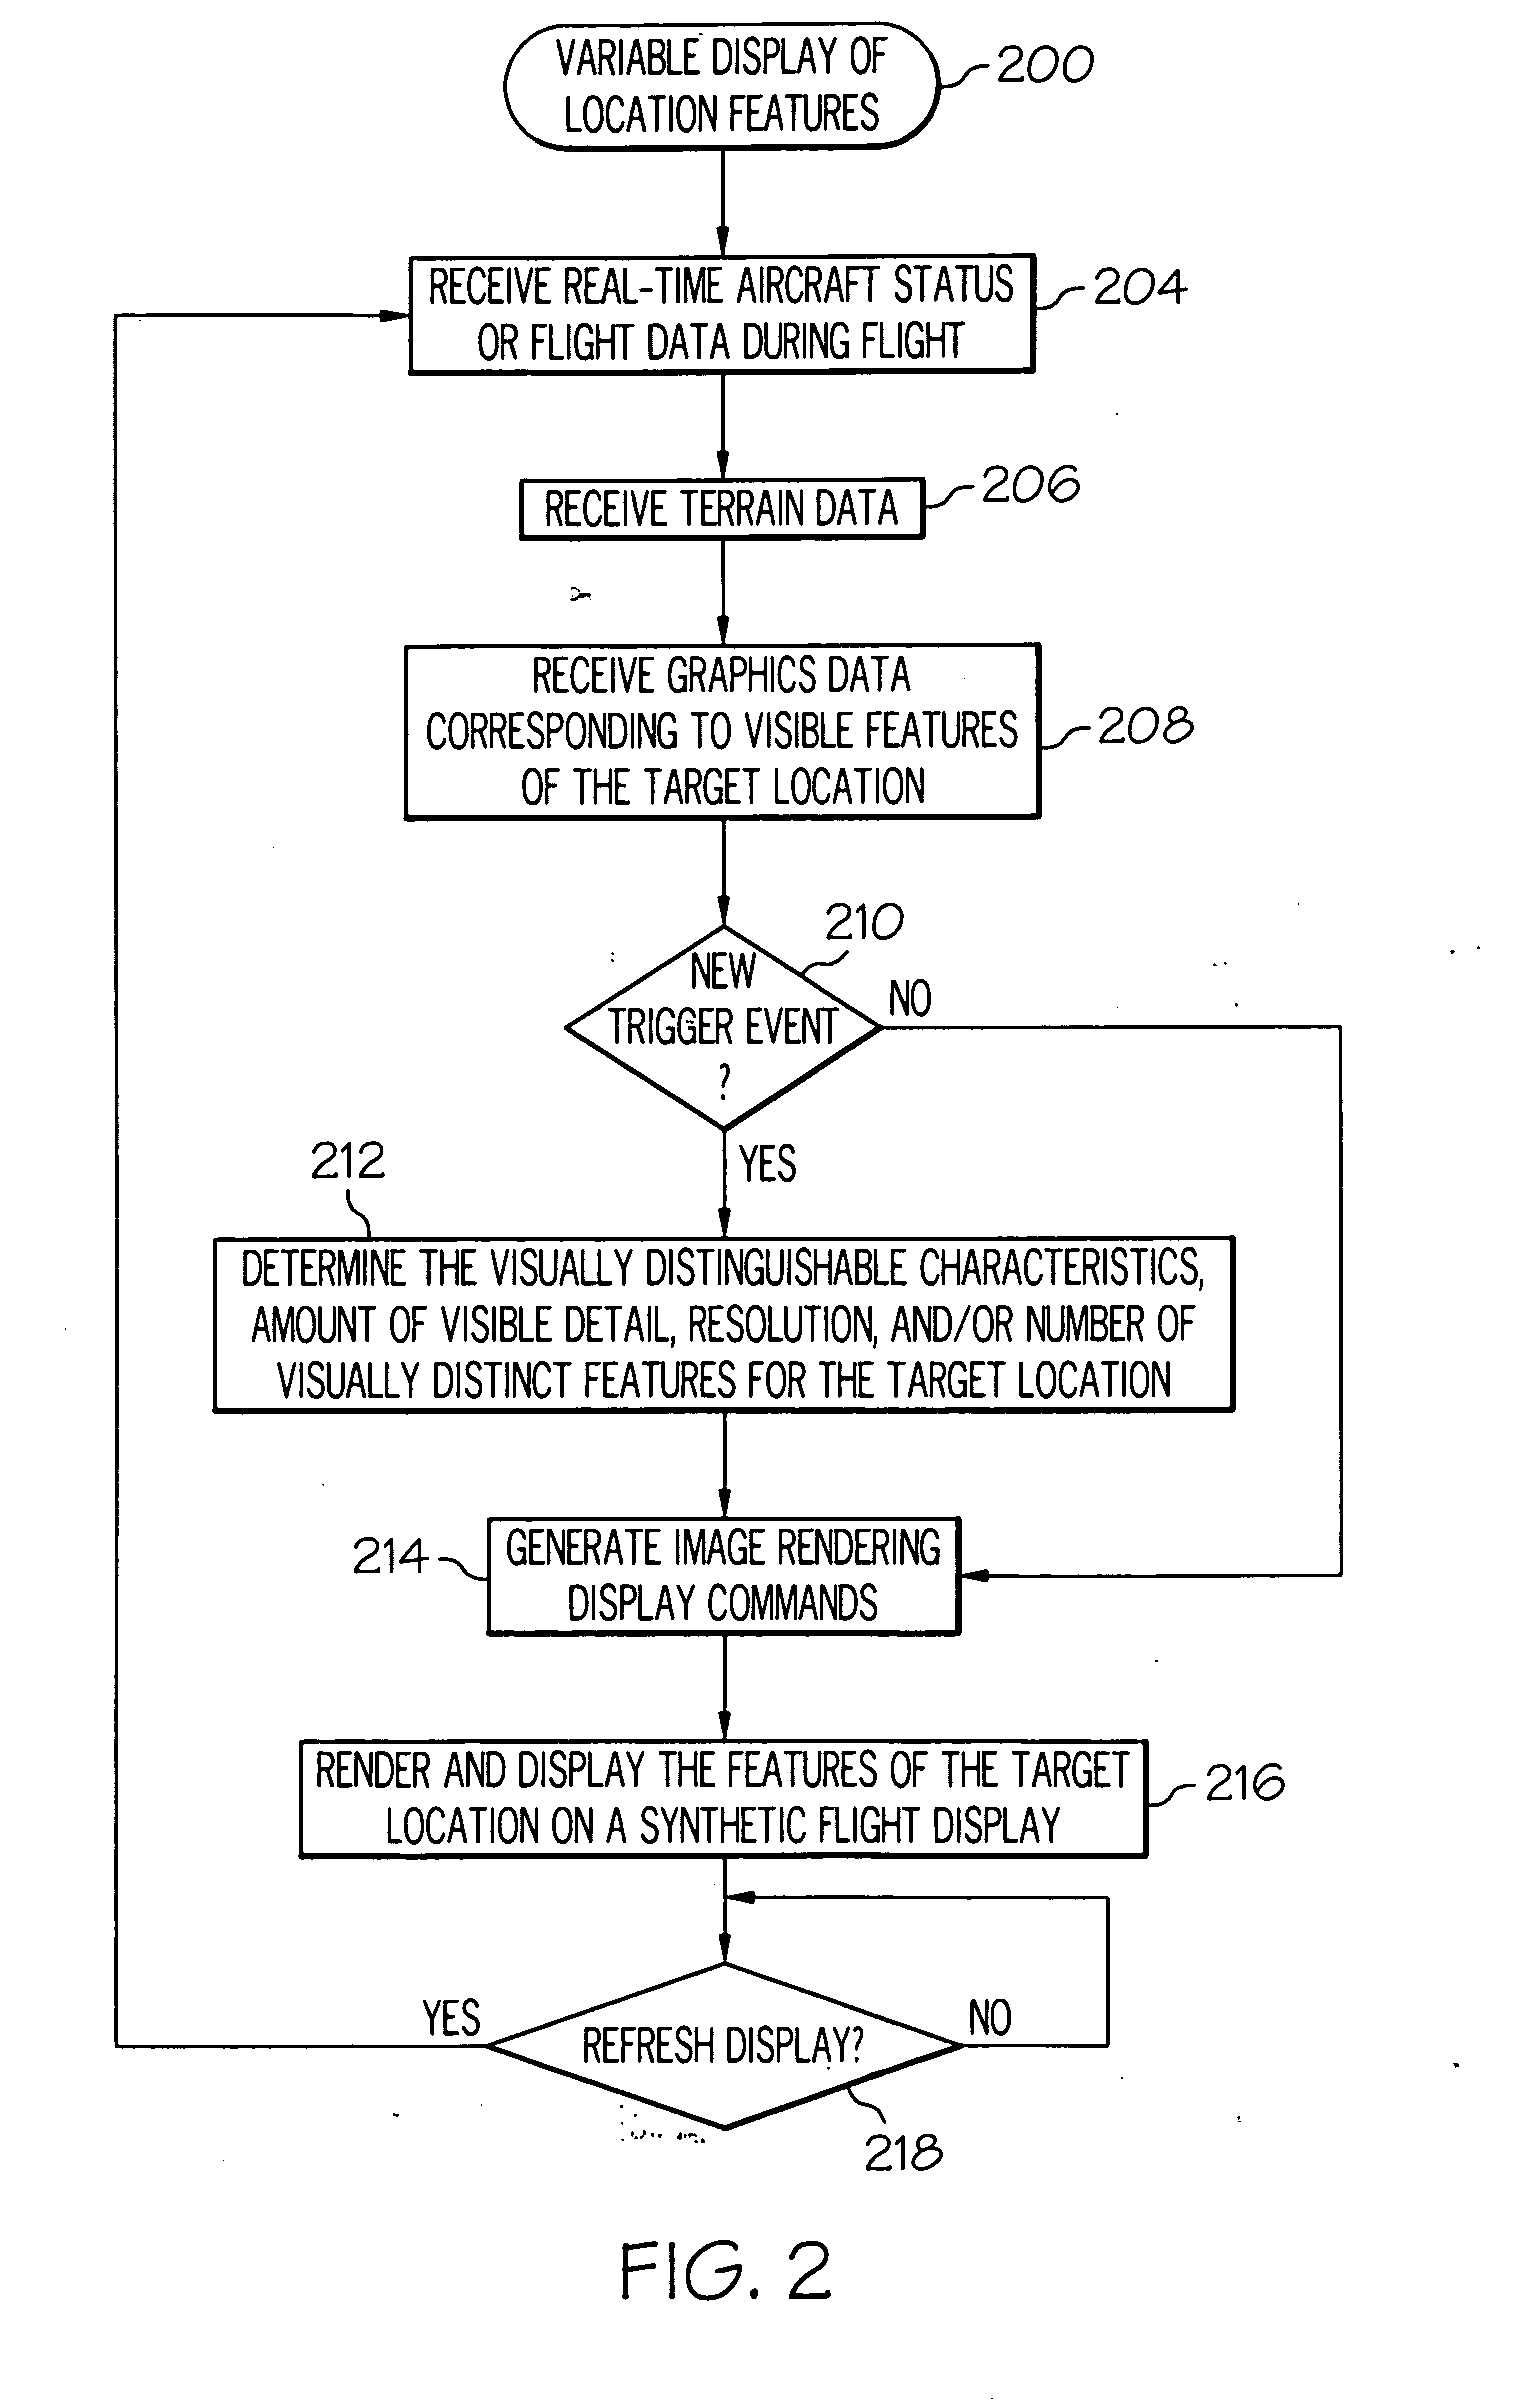 System and method for rendering visible features of a target location on a synthetic flight display